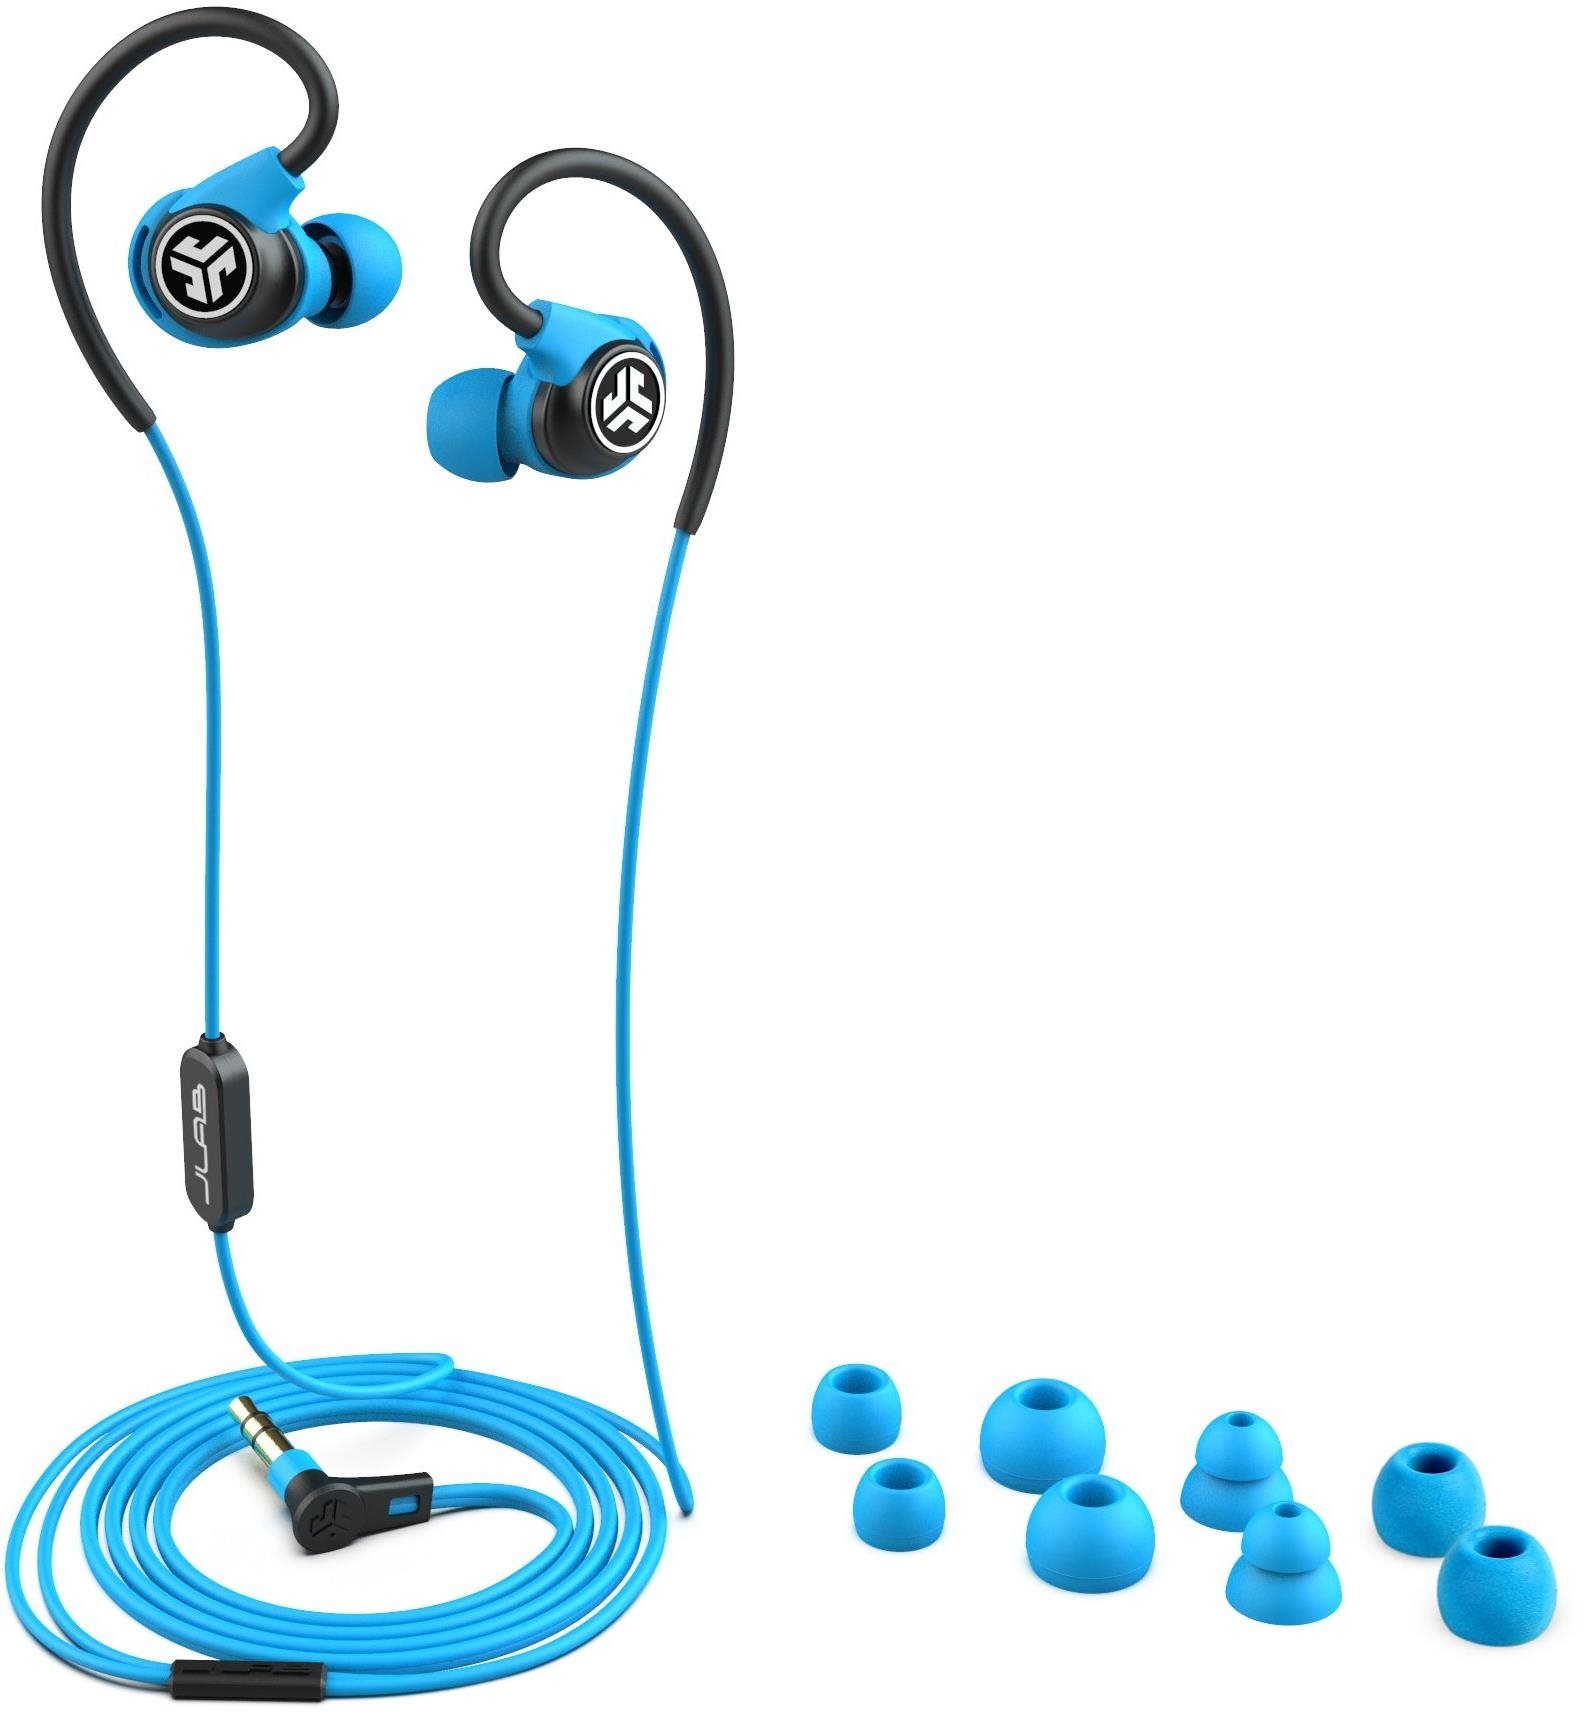 Headphones JLAB Fit Sport 3 Wired Fitness Earbuds, Black/Blue Accessory